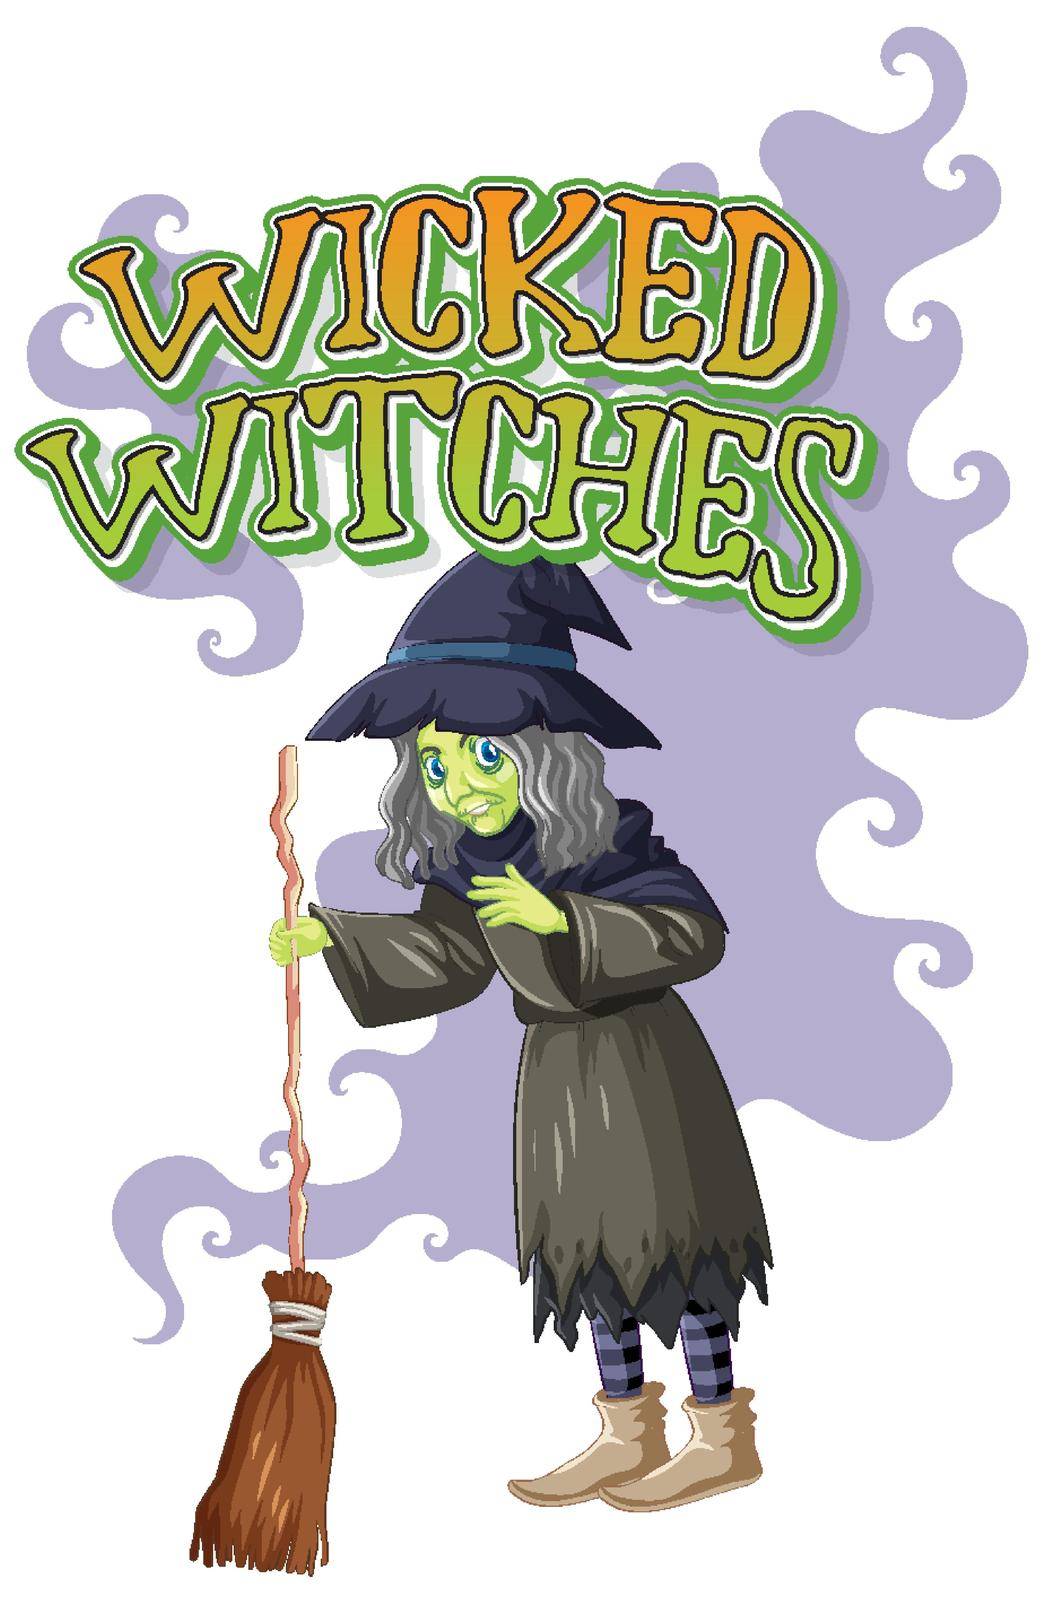 Wicked witches holding broom illustration